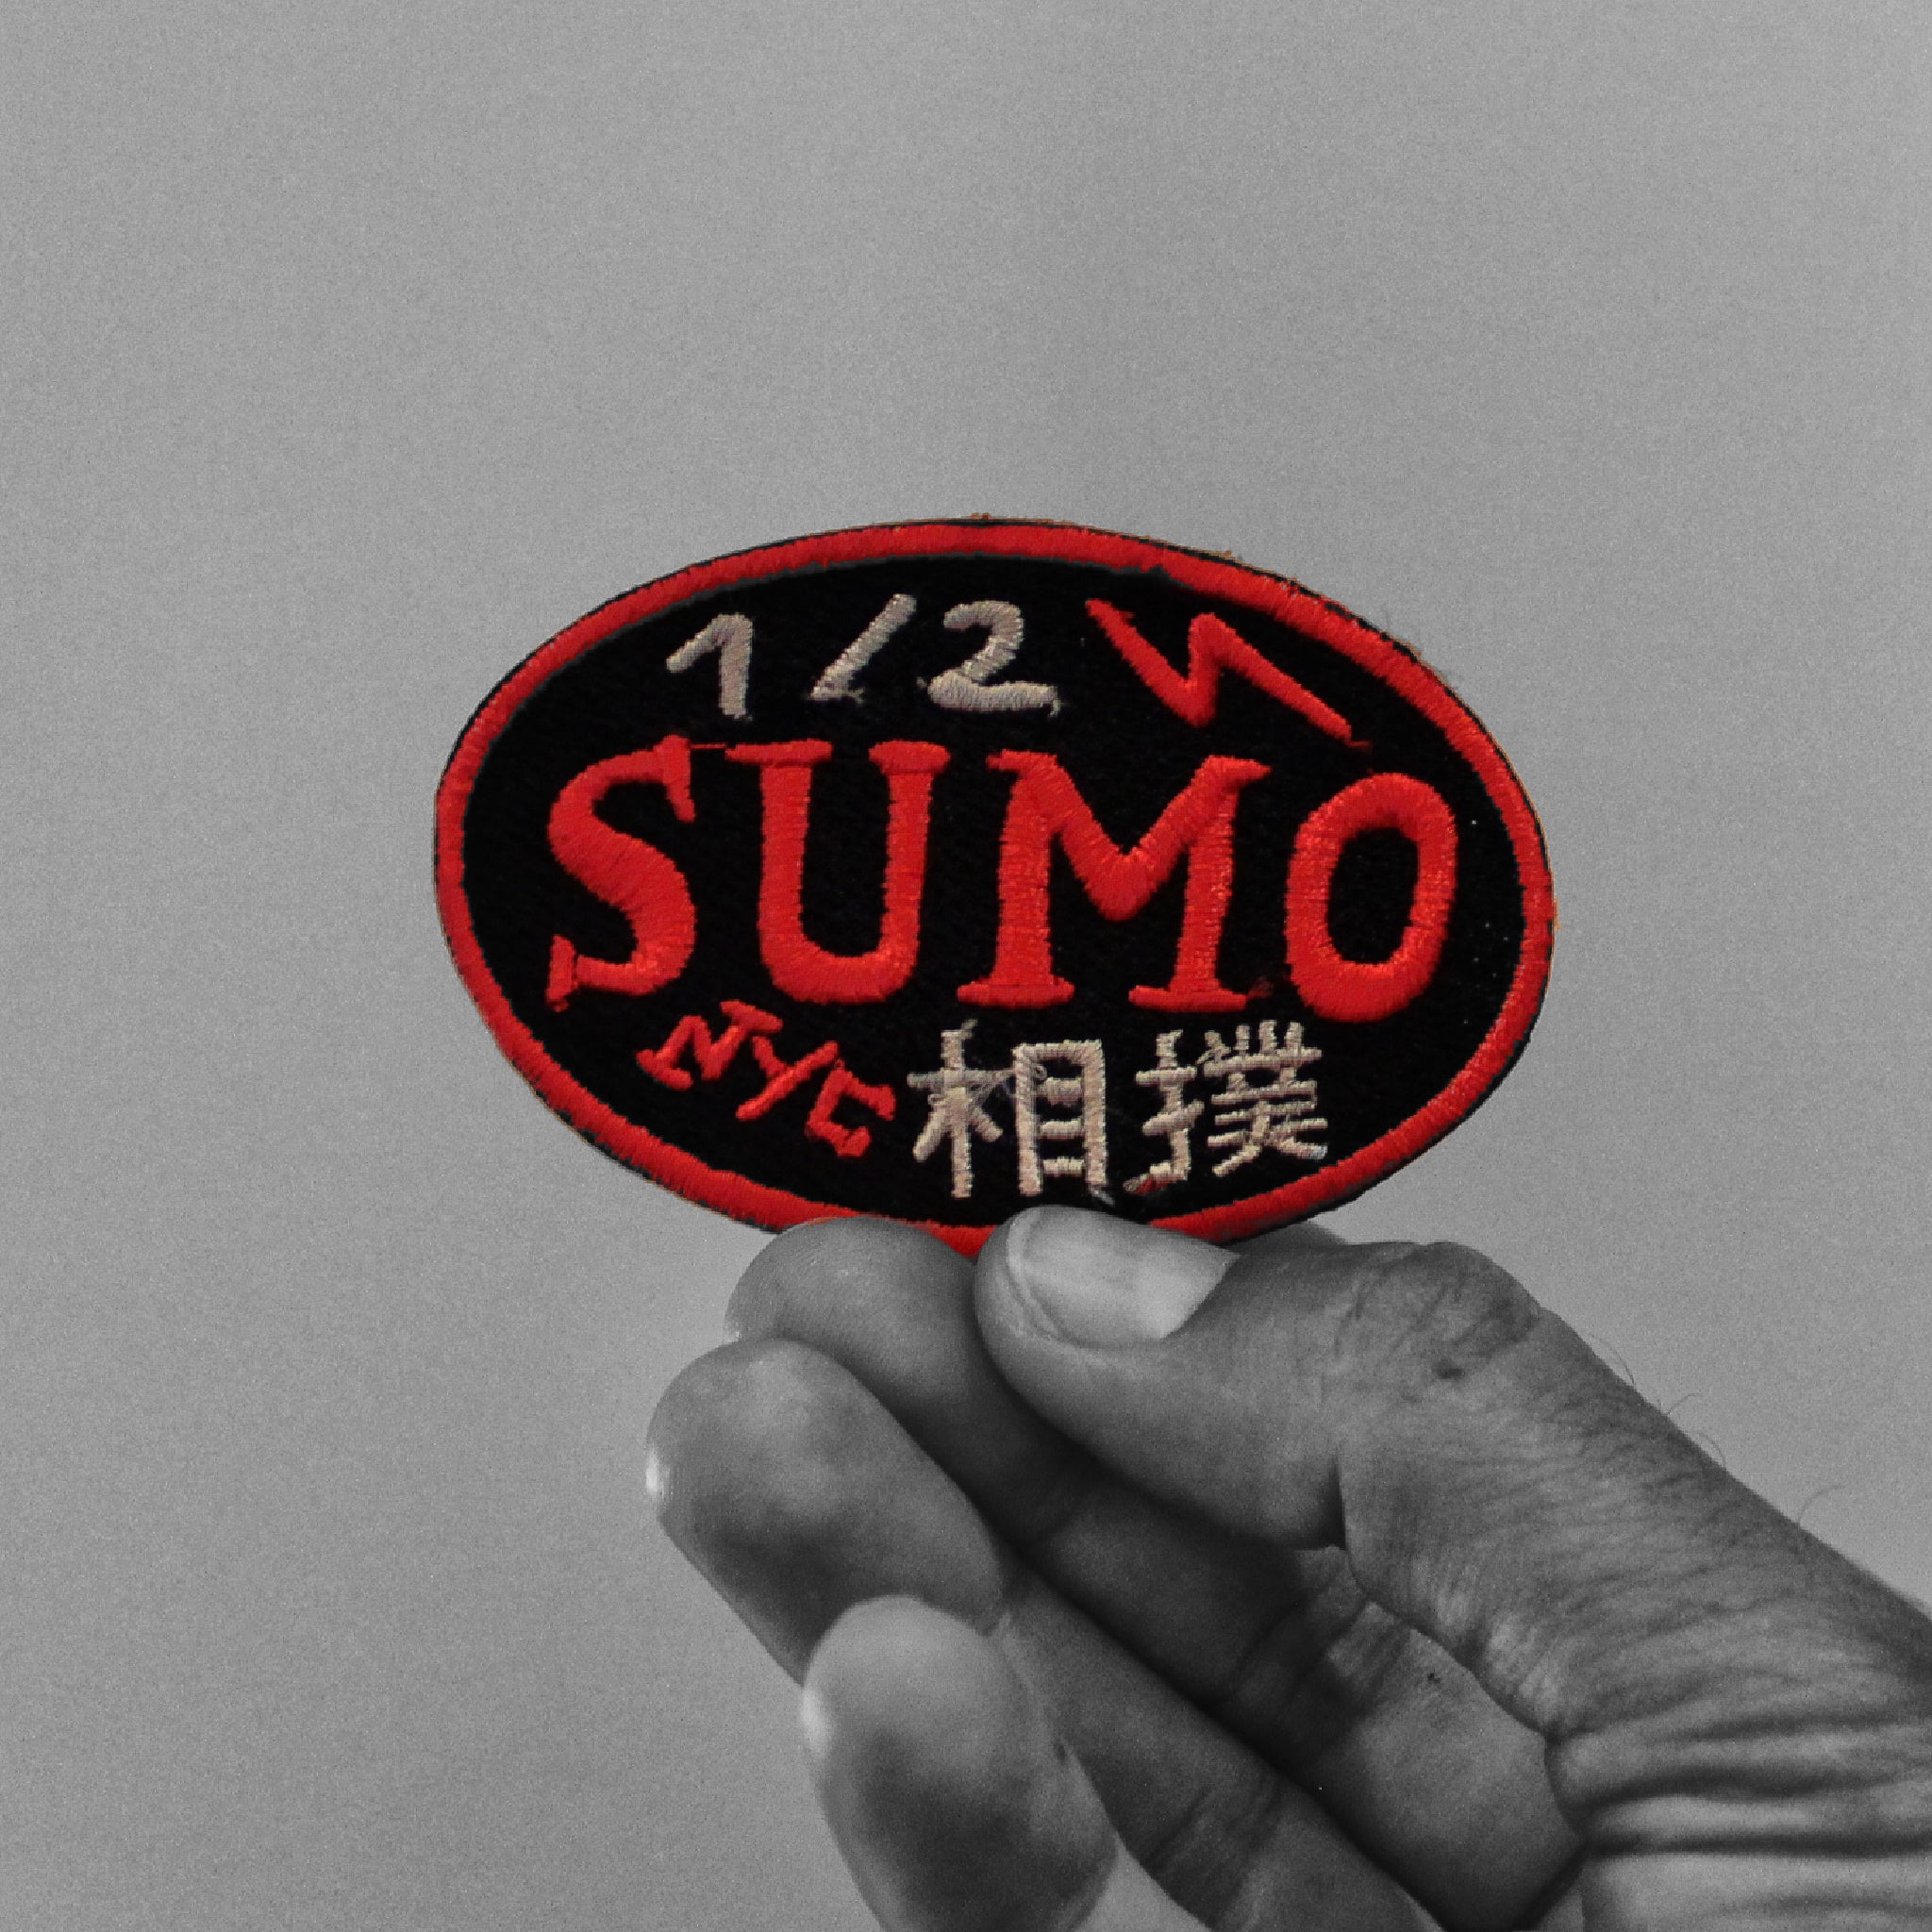 Half Sumo Patch Collection #1